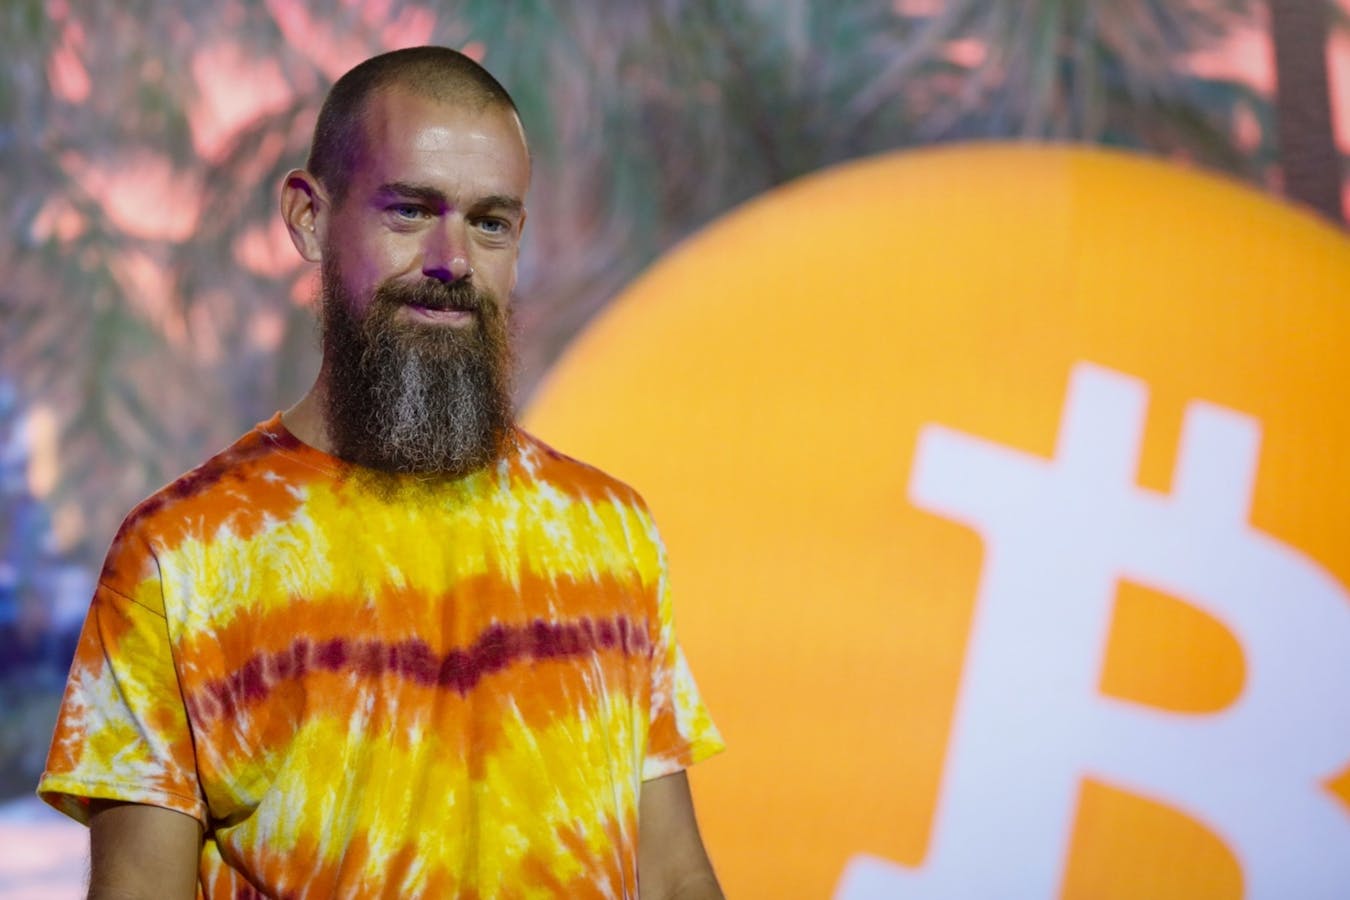 ack Dorsey, CEO of Twitter and Square, speaks during the Bitcoin 2021 conference in Miami in June. Photo: Bloomberg